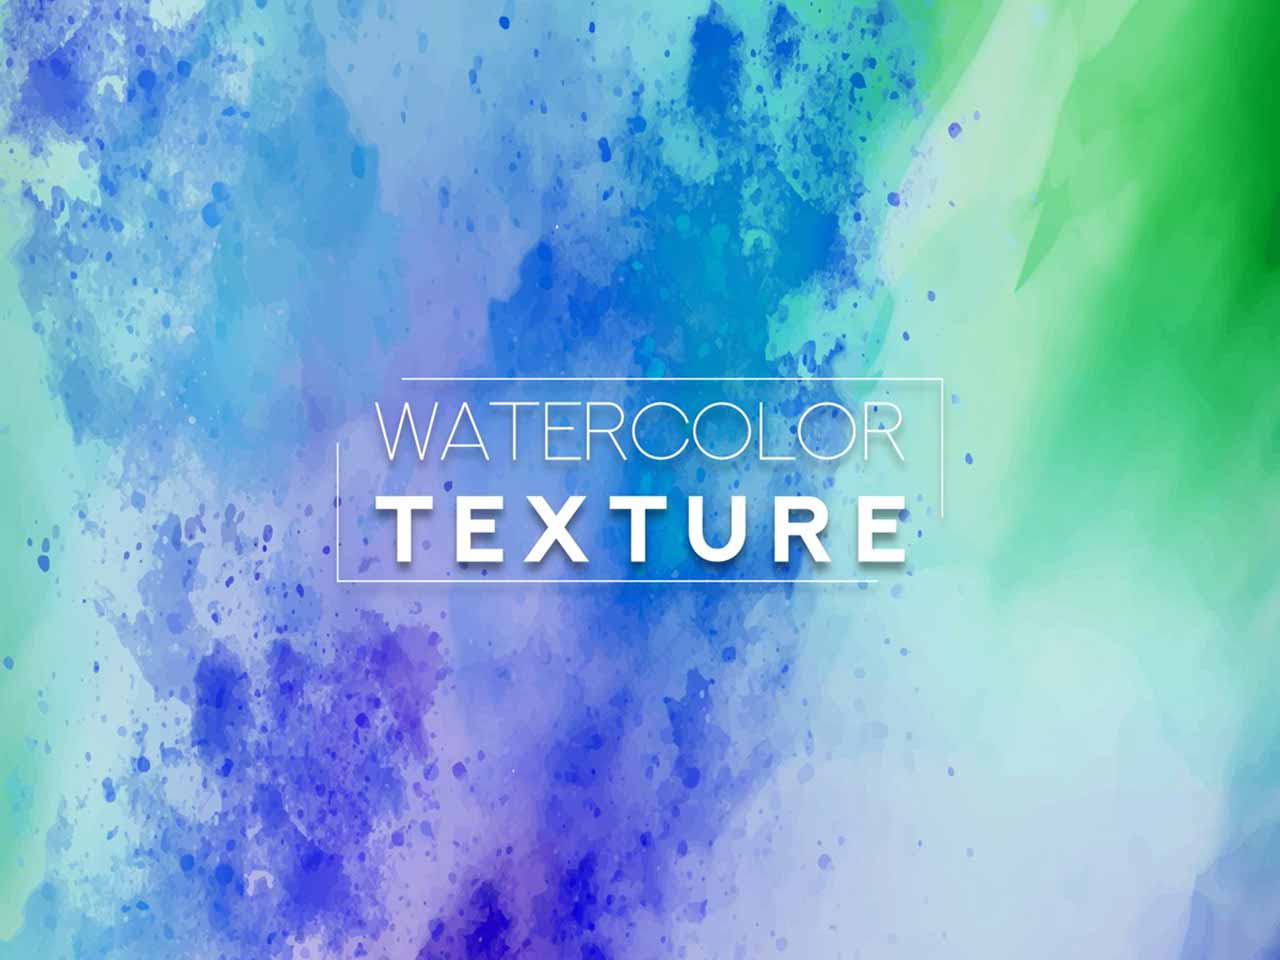 Winter Greenery Watercolor Pack – Free Design Resources